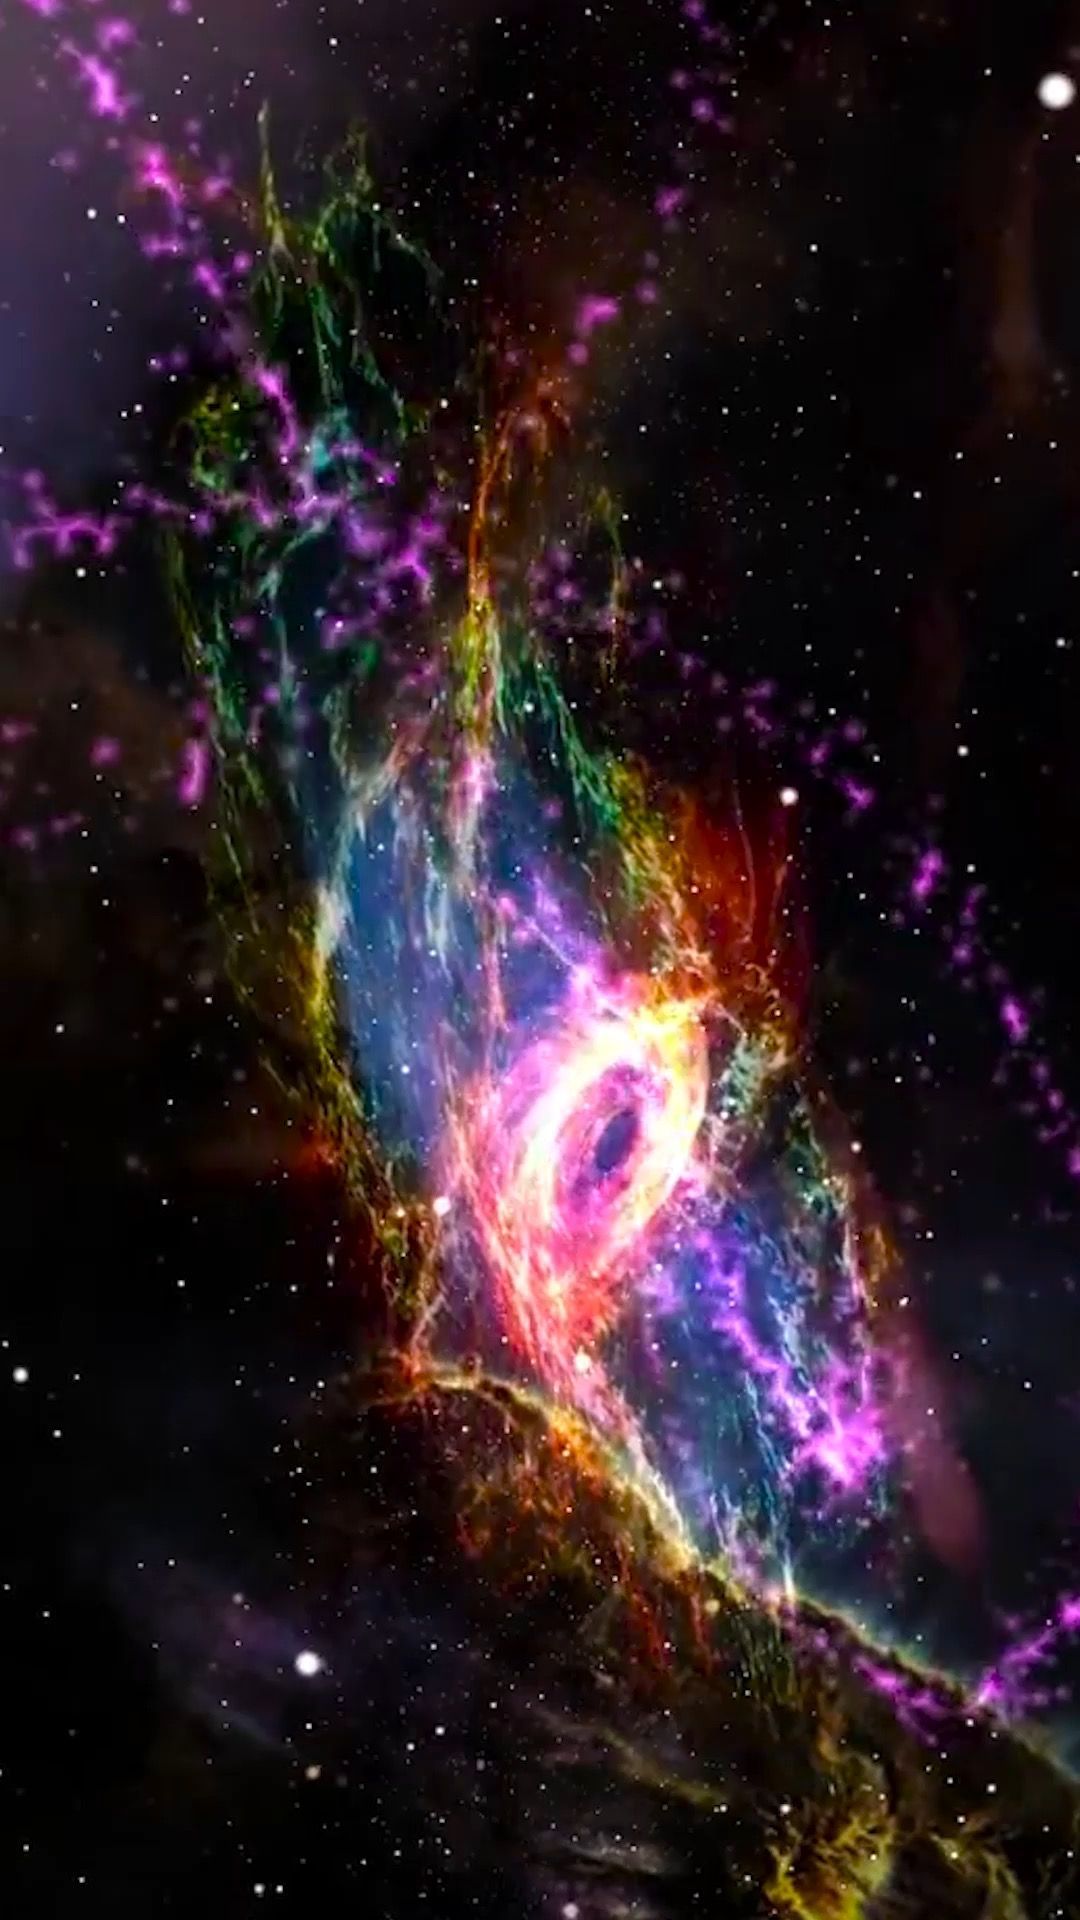 iPhone Wallpaper. Nature, Nebula, Galaxy, Purple, Astronomical object, Outer space